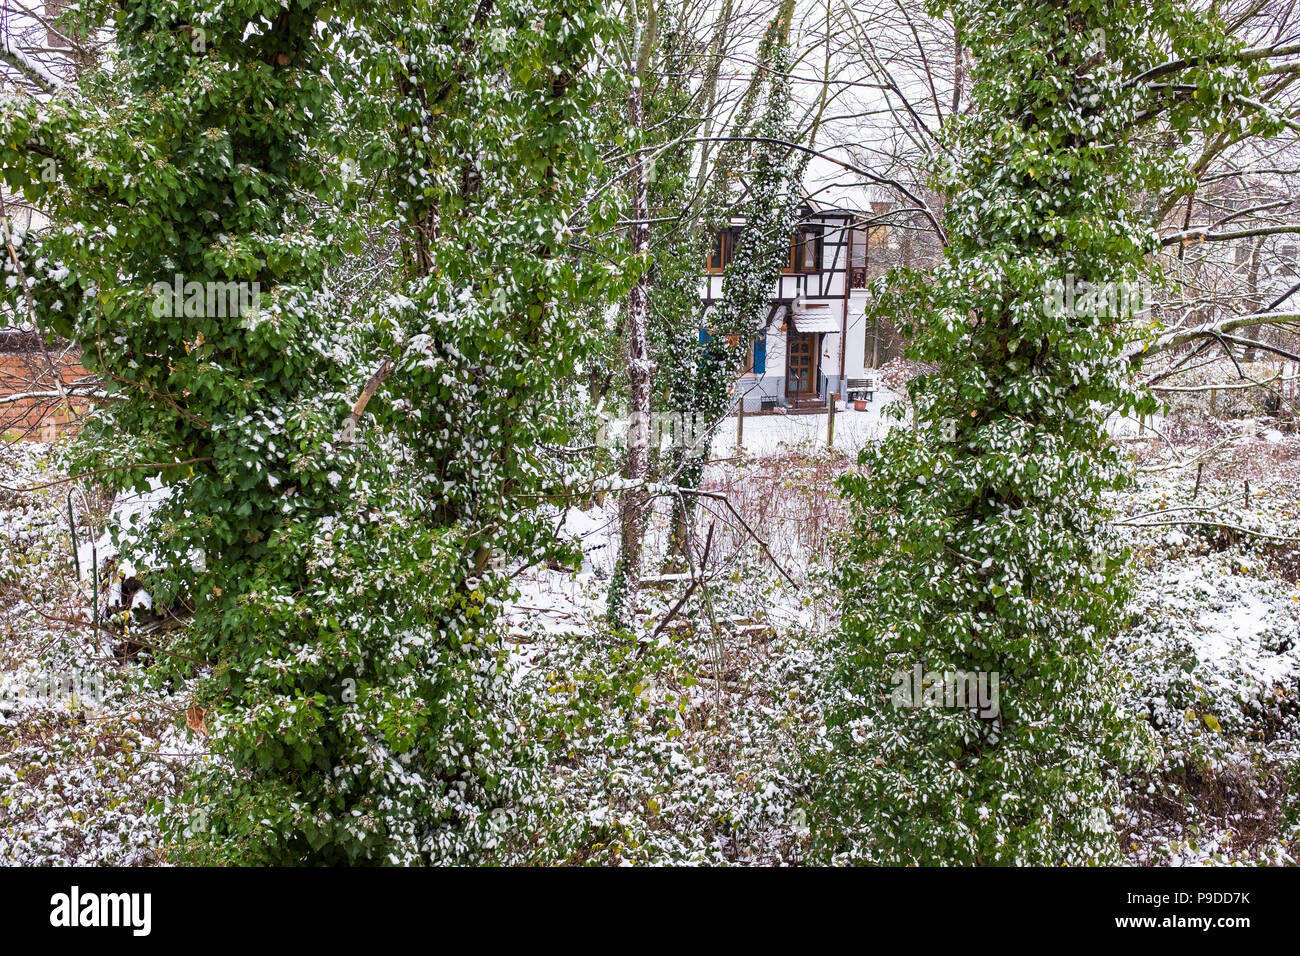 Ivy-covered maple trees trunks, detached house, garden, snow, wintertime, Alsace, France, Europe, Stock Photo